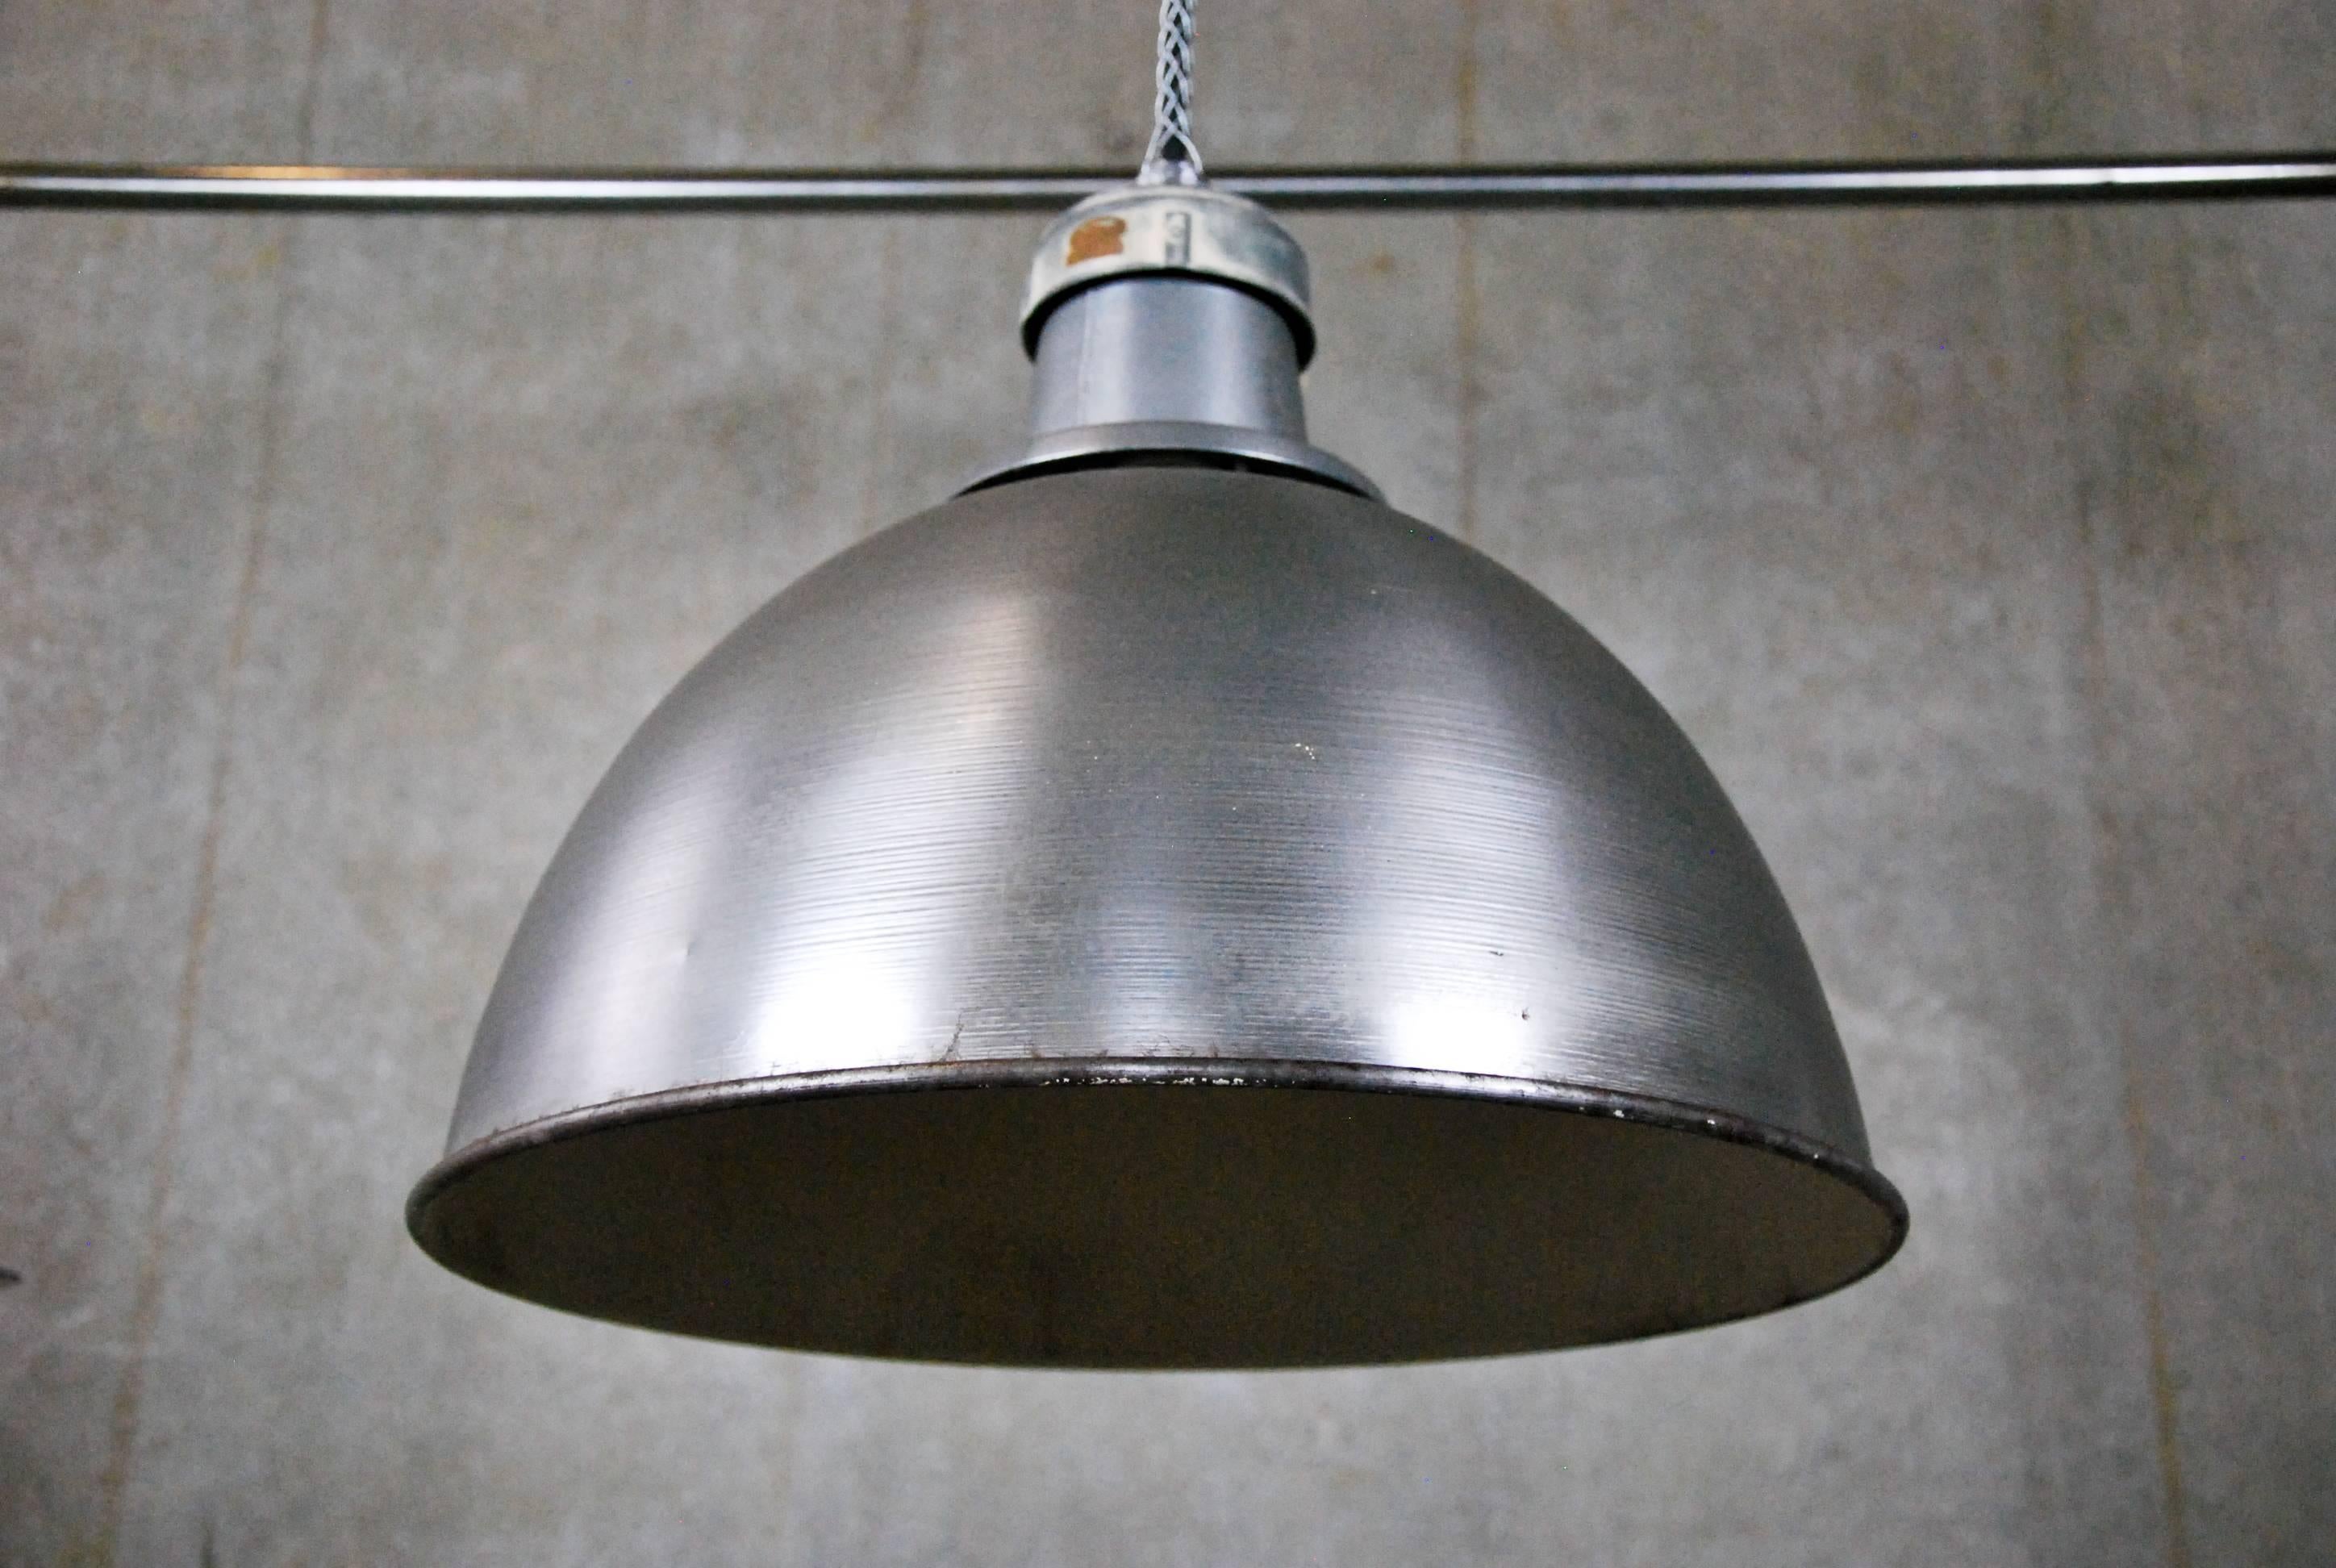 Vintage 16-inch diameter spun steel pendant lights, salvaged from a factory in Montreal, Quebec. We have 15 of these dome-shaped industrial lights. They have been re-wired and CSA approved, and currently hang on 8 feet of cable. Ceiling mounting